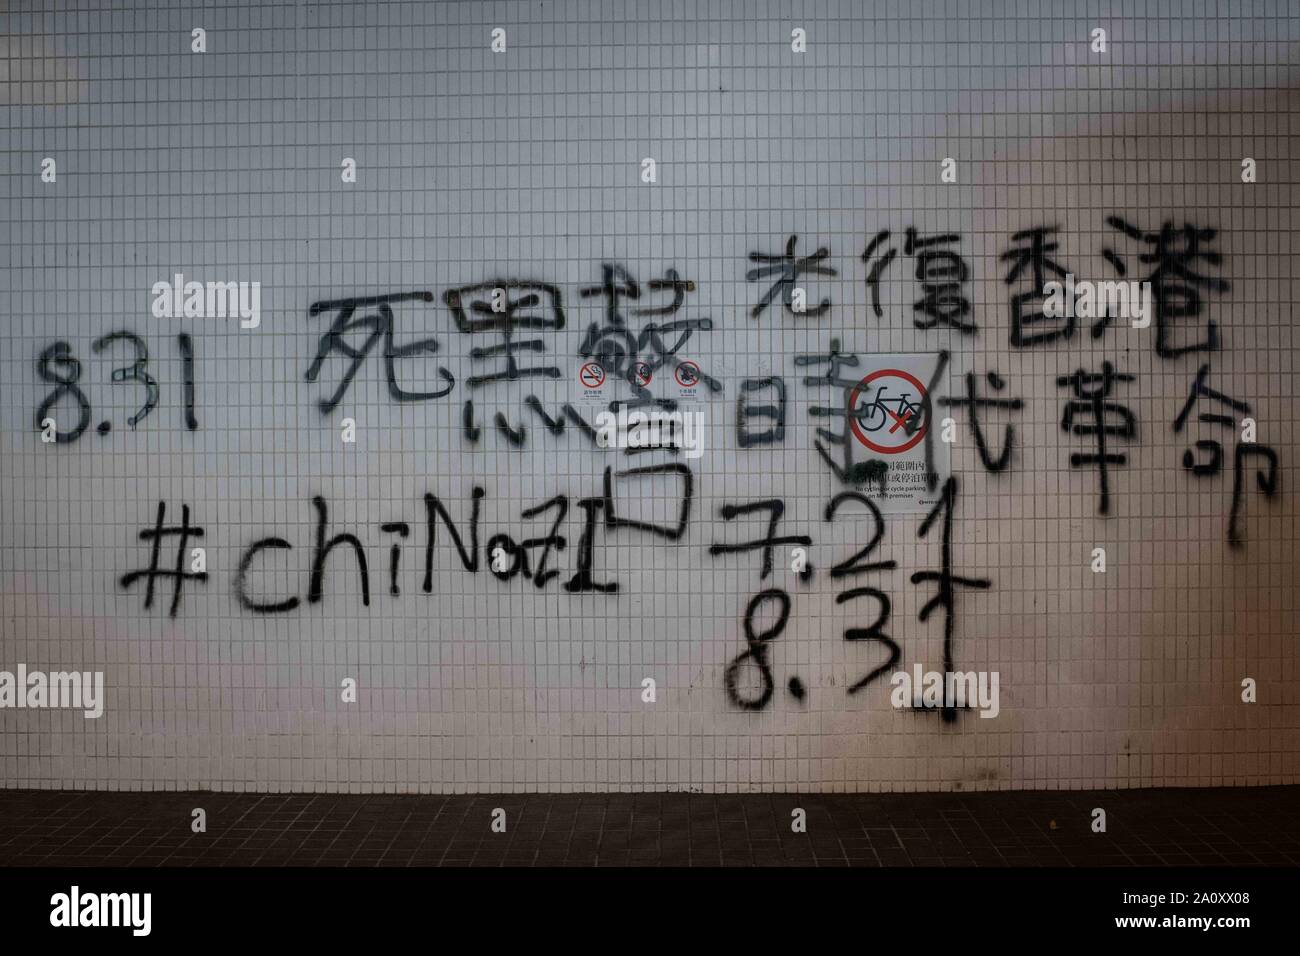 An anti government graffiti during the protests.Protesters continue to demonstrate across Hong Kong for the 15th consecutive week. Demonstration were held inside a shopping mall in Yuen Long against the government. Stock Photo